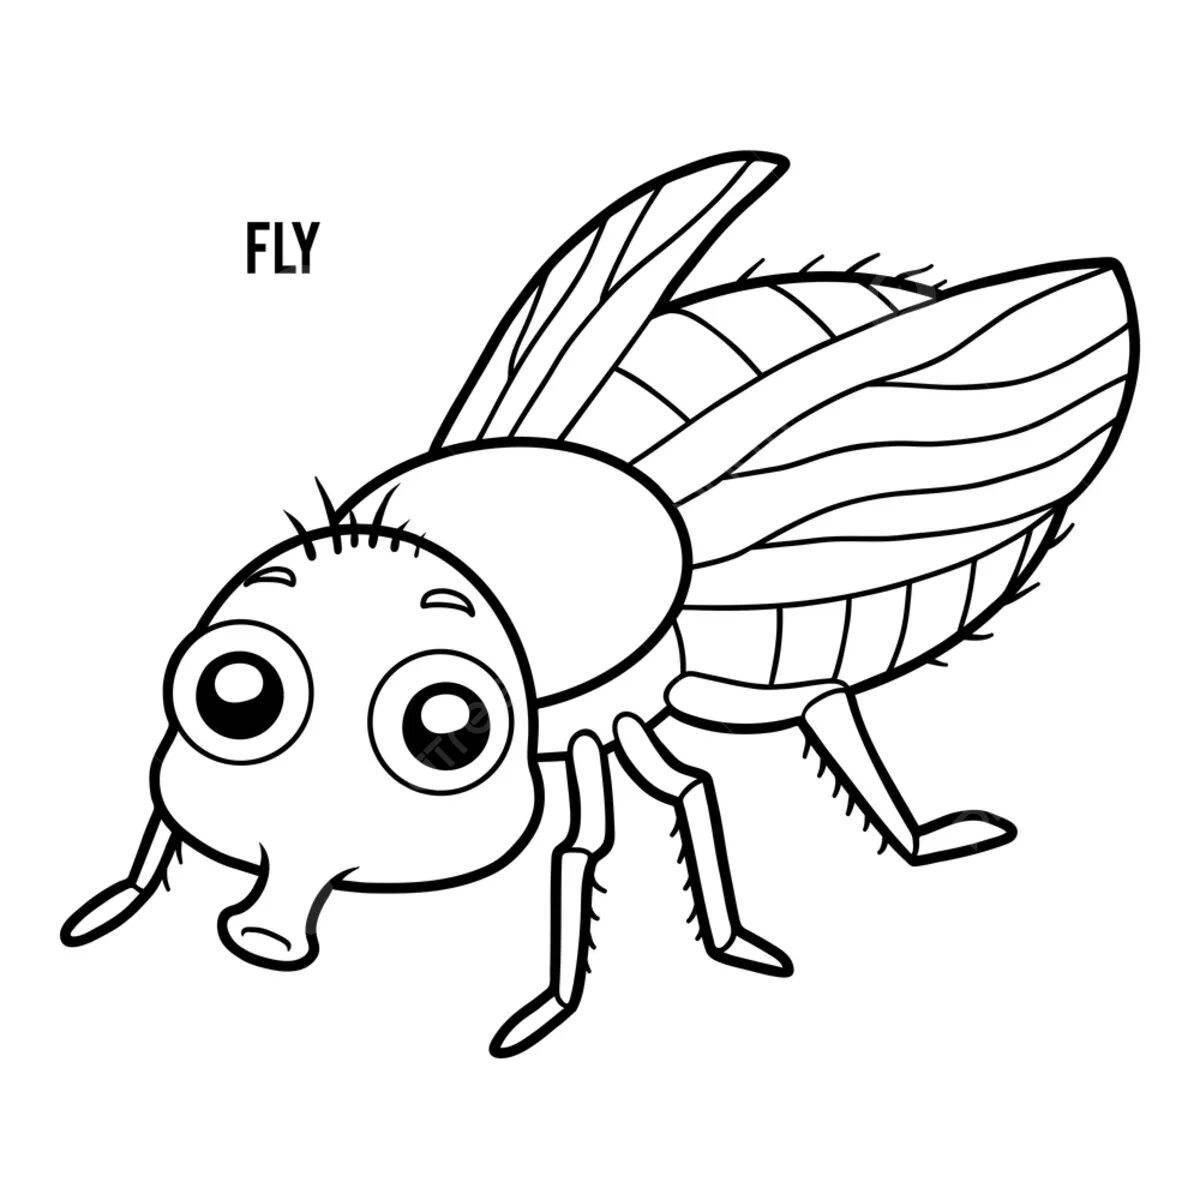 Innovative fly coloring book for 3-4 year olds